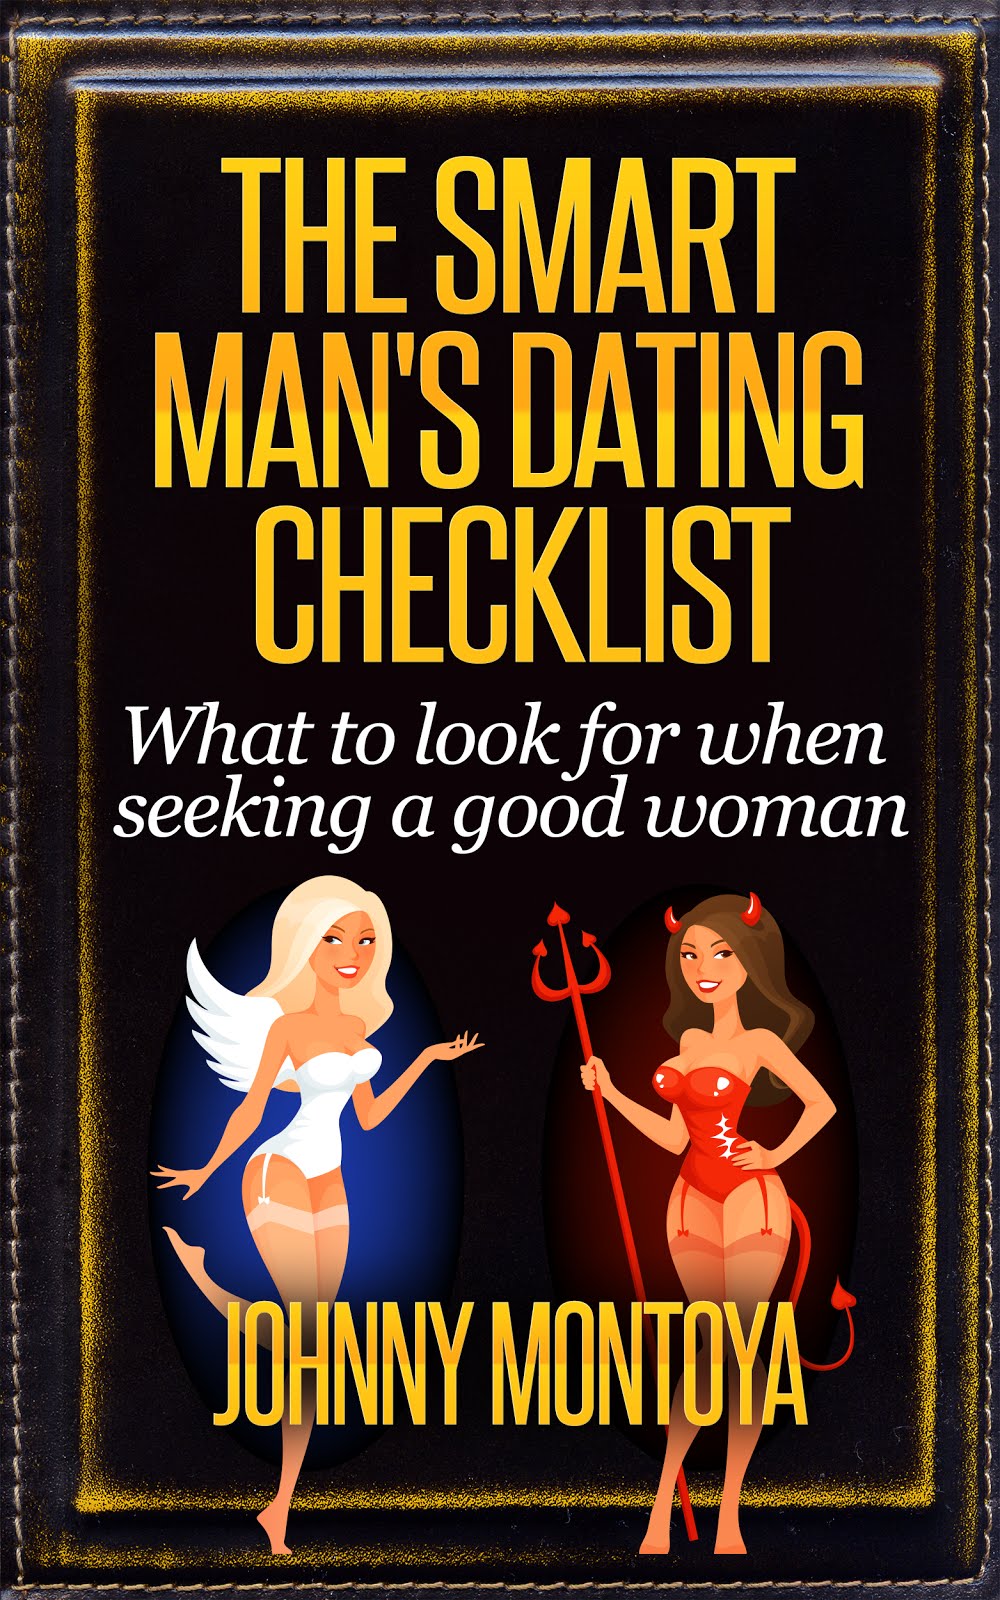 The Smart Man's Dating Checklist